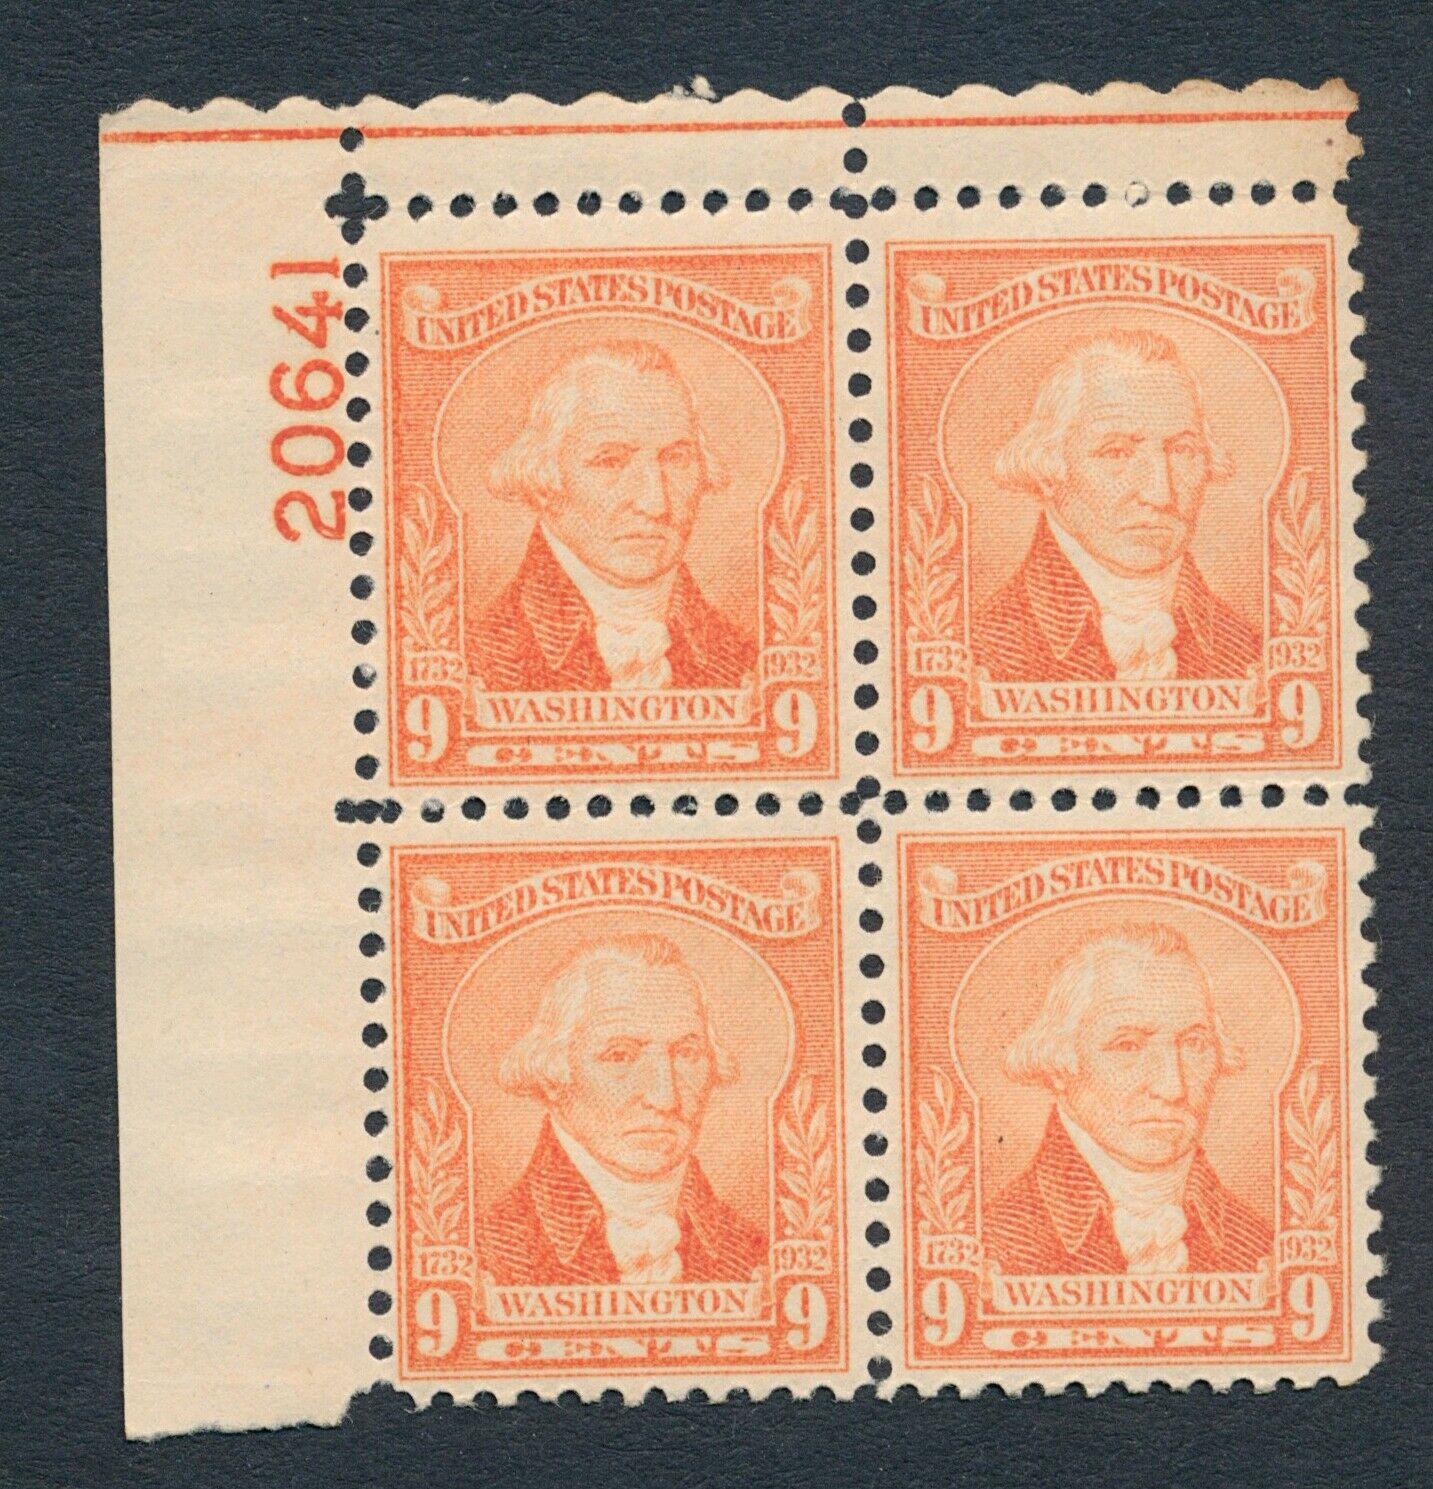 Drbobstamps Us Scott #714 Mint Nh Plate Block Of 4 Stamps Cat $45